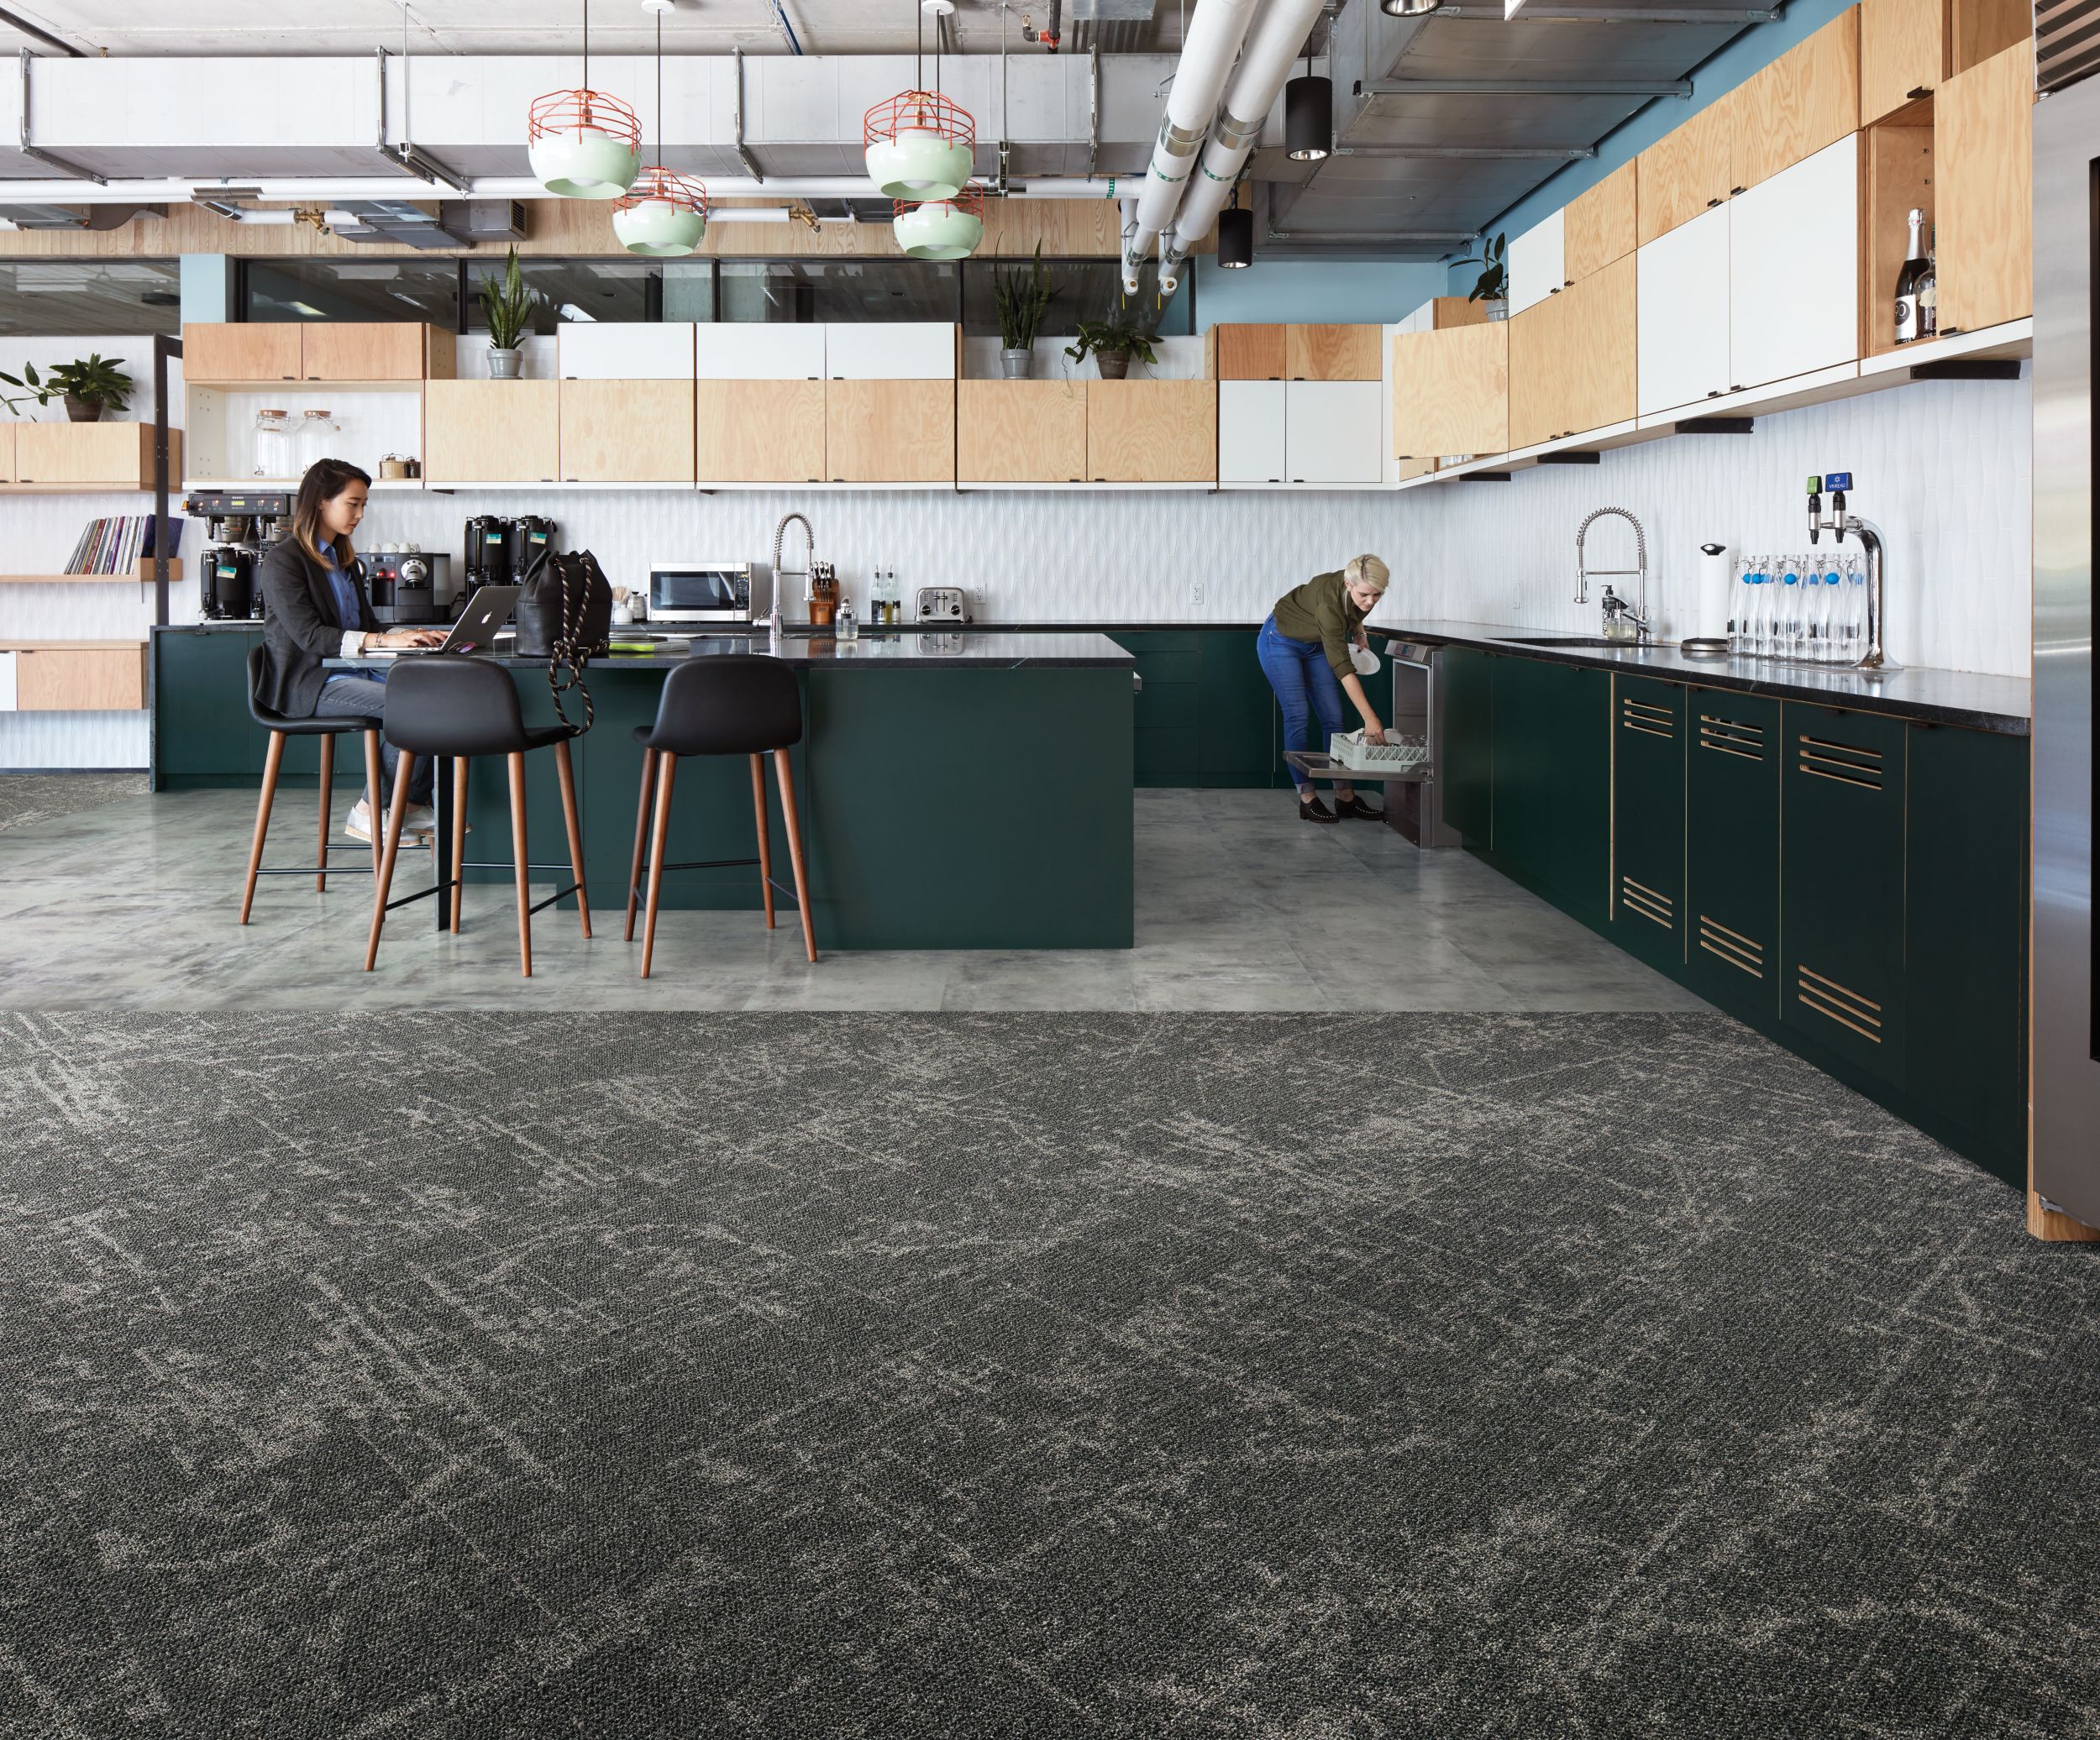 Interface Ice Breaker carpet tile and Textured Stones LVT in kitchen area with women lodaing dish washer and women working on computer número de imagen 6